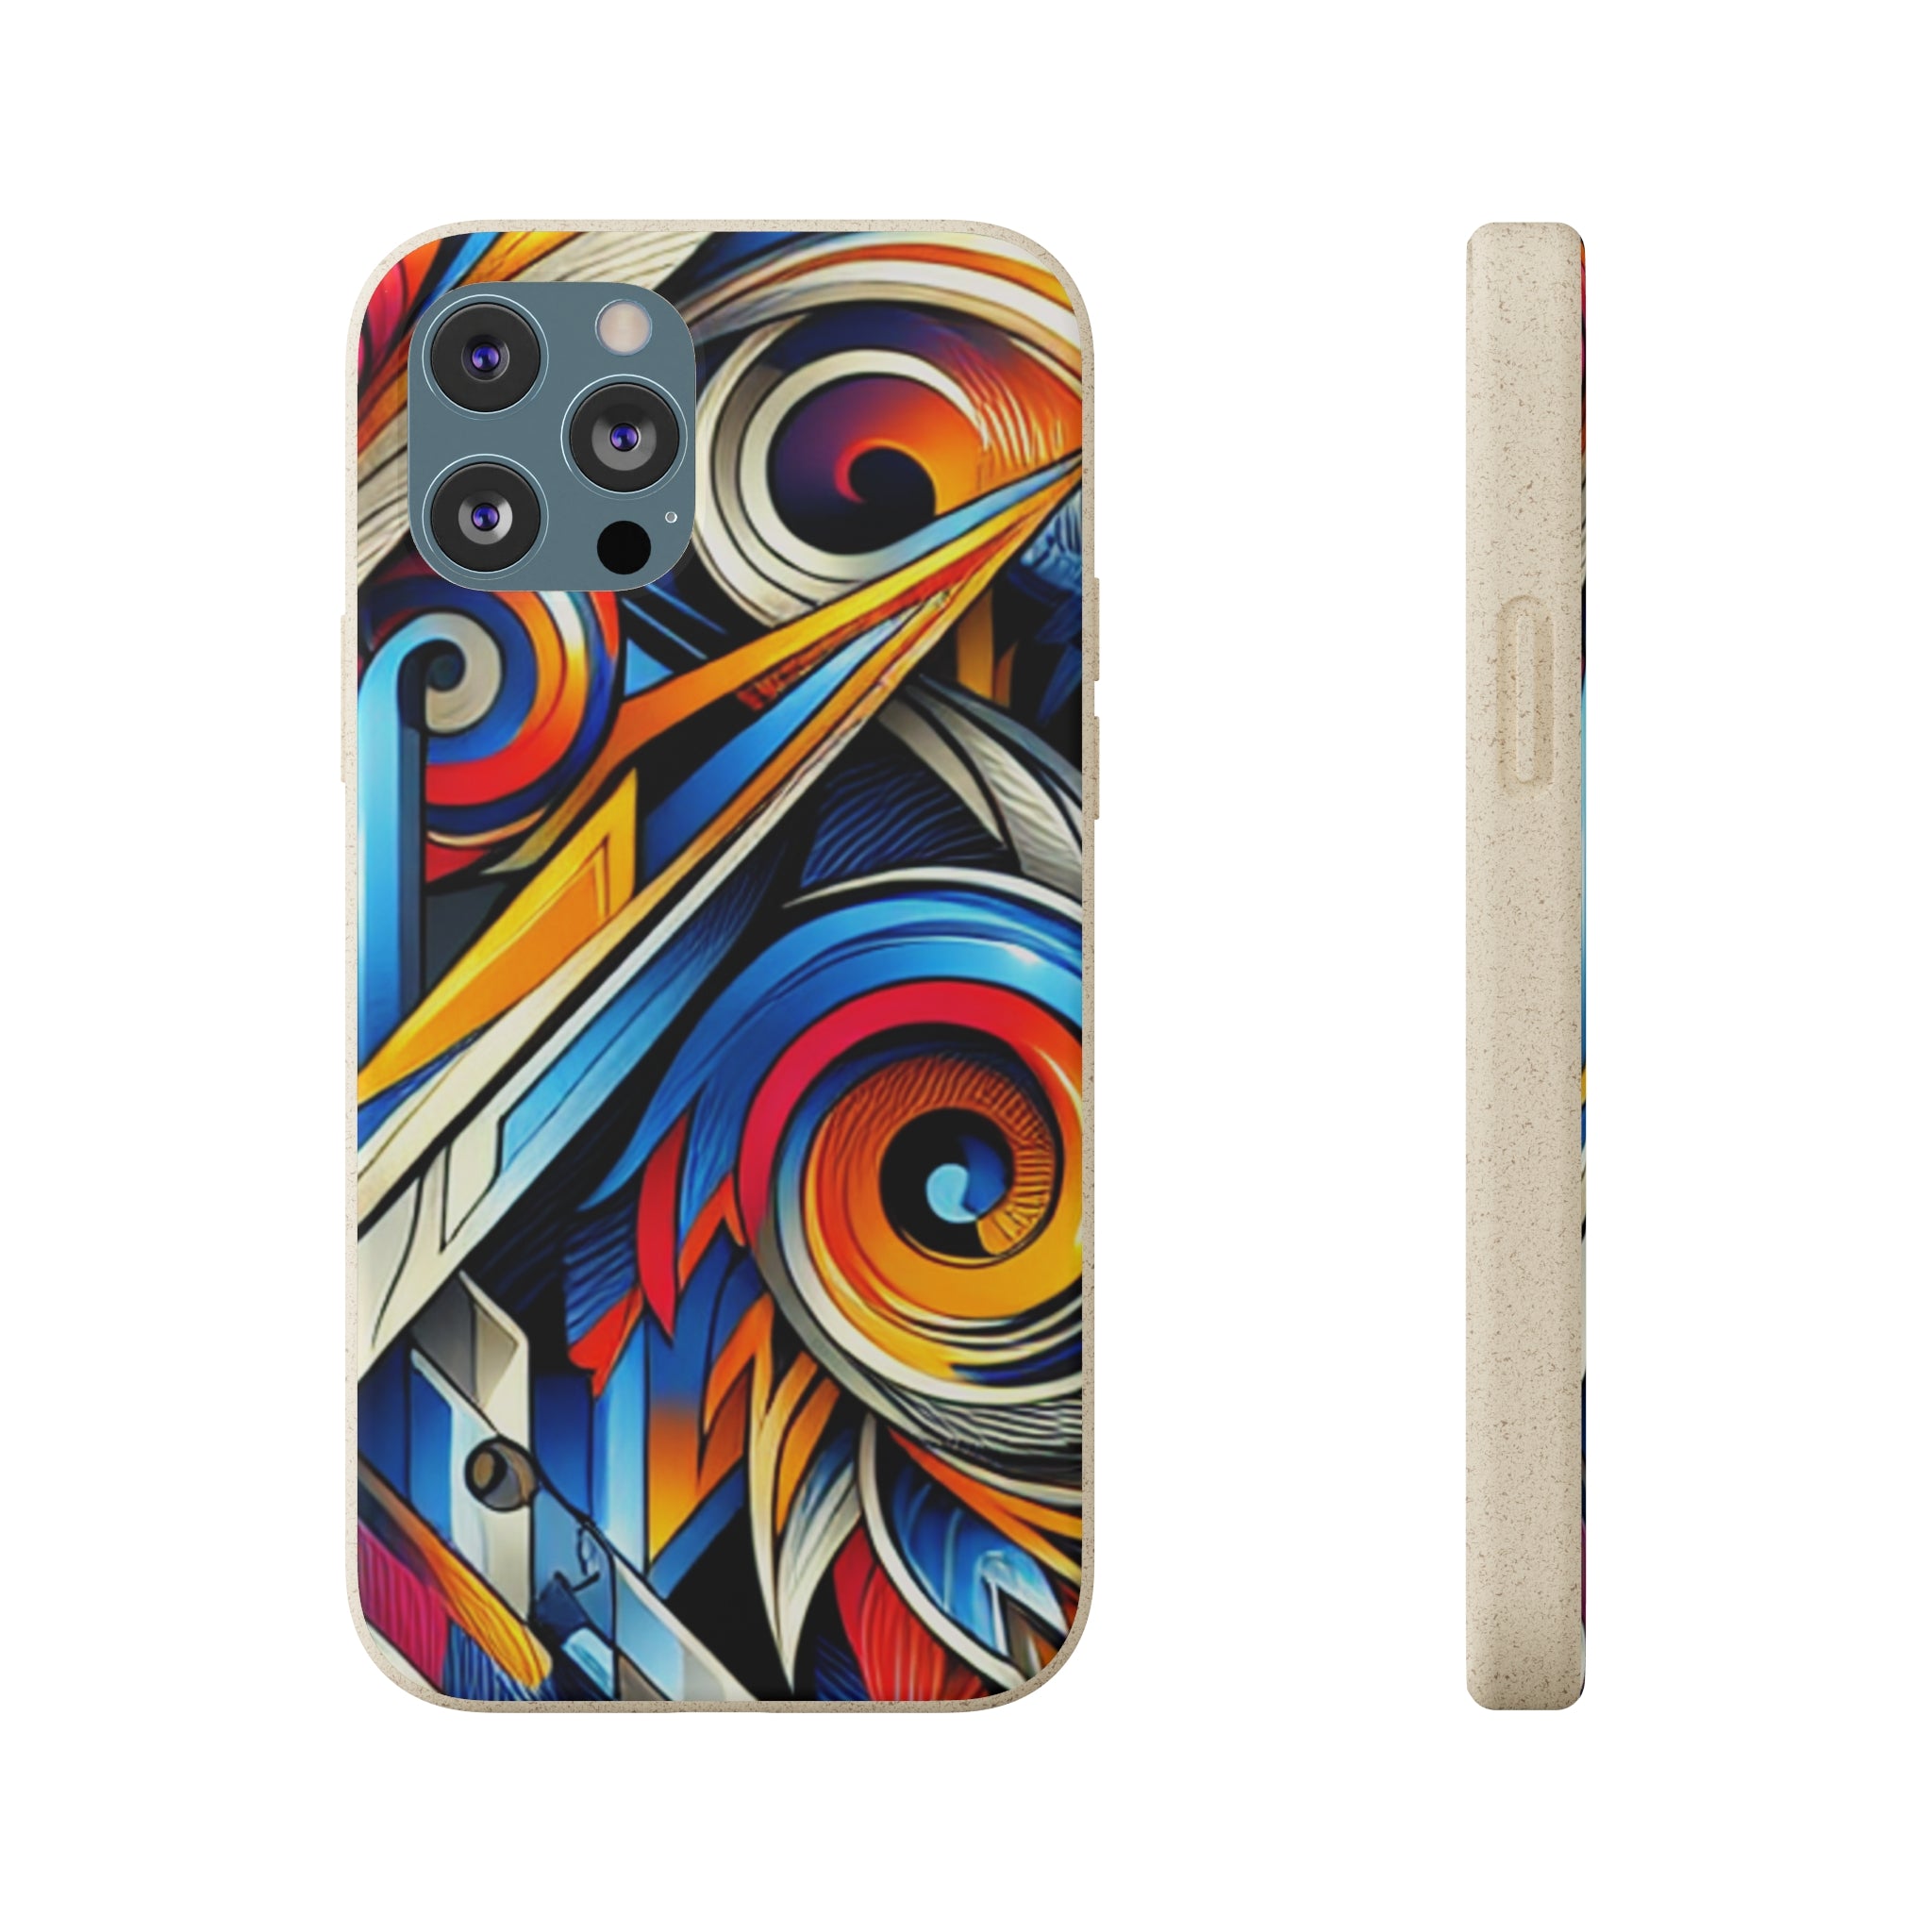 Sally Woodcraft - Biodegradable iPhone Cases